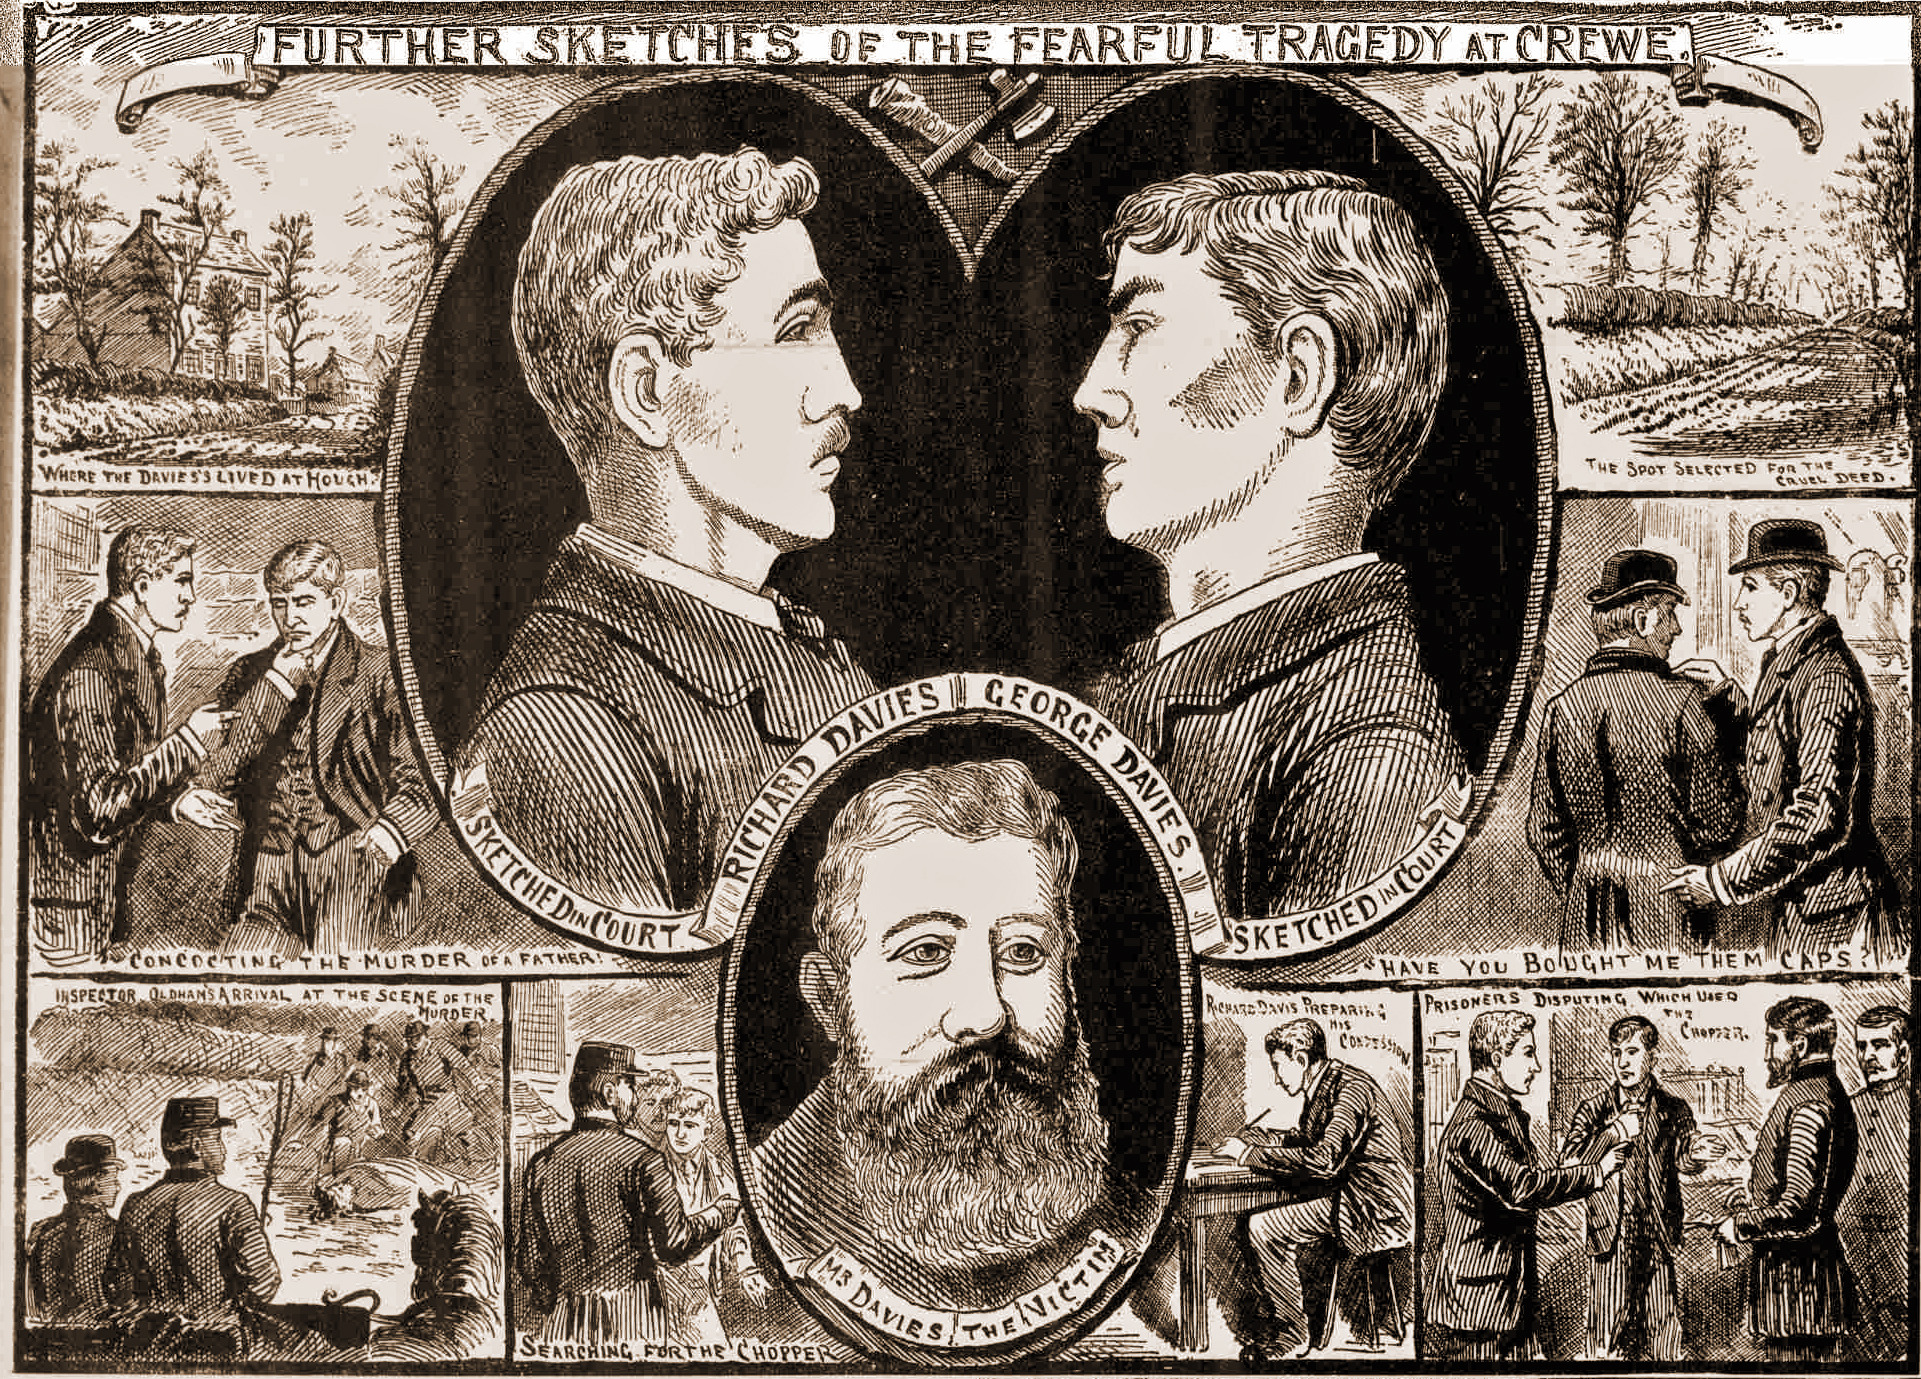 An Illustration showing Richard and George Davies.